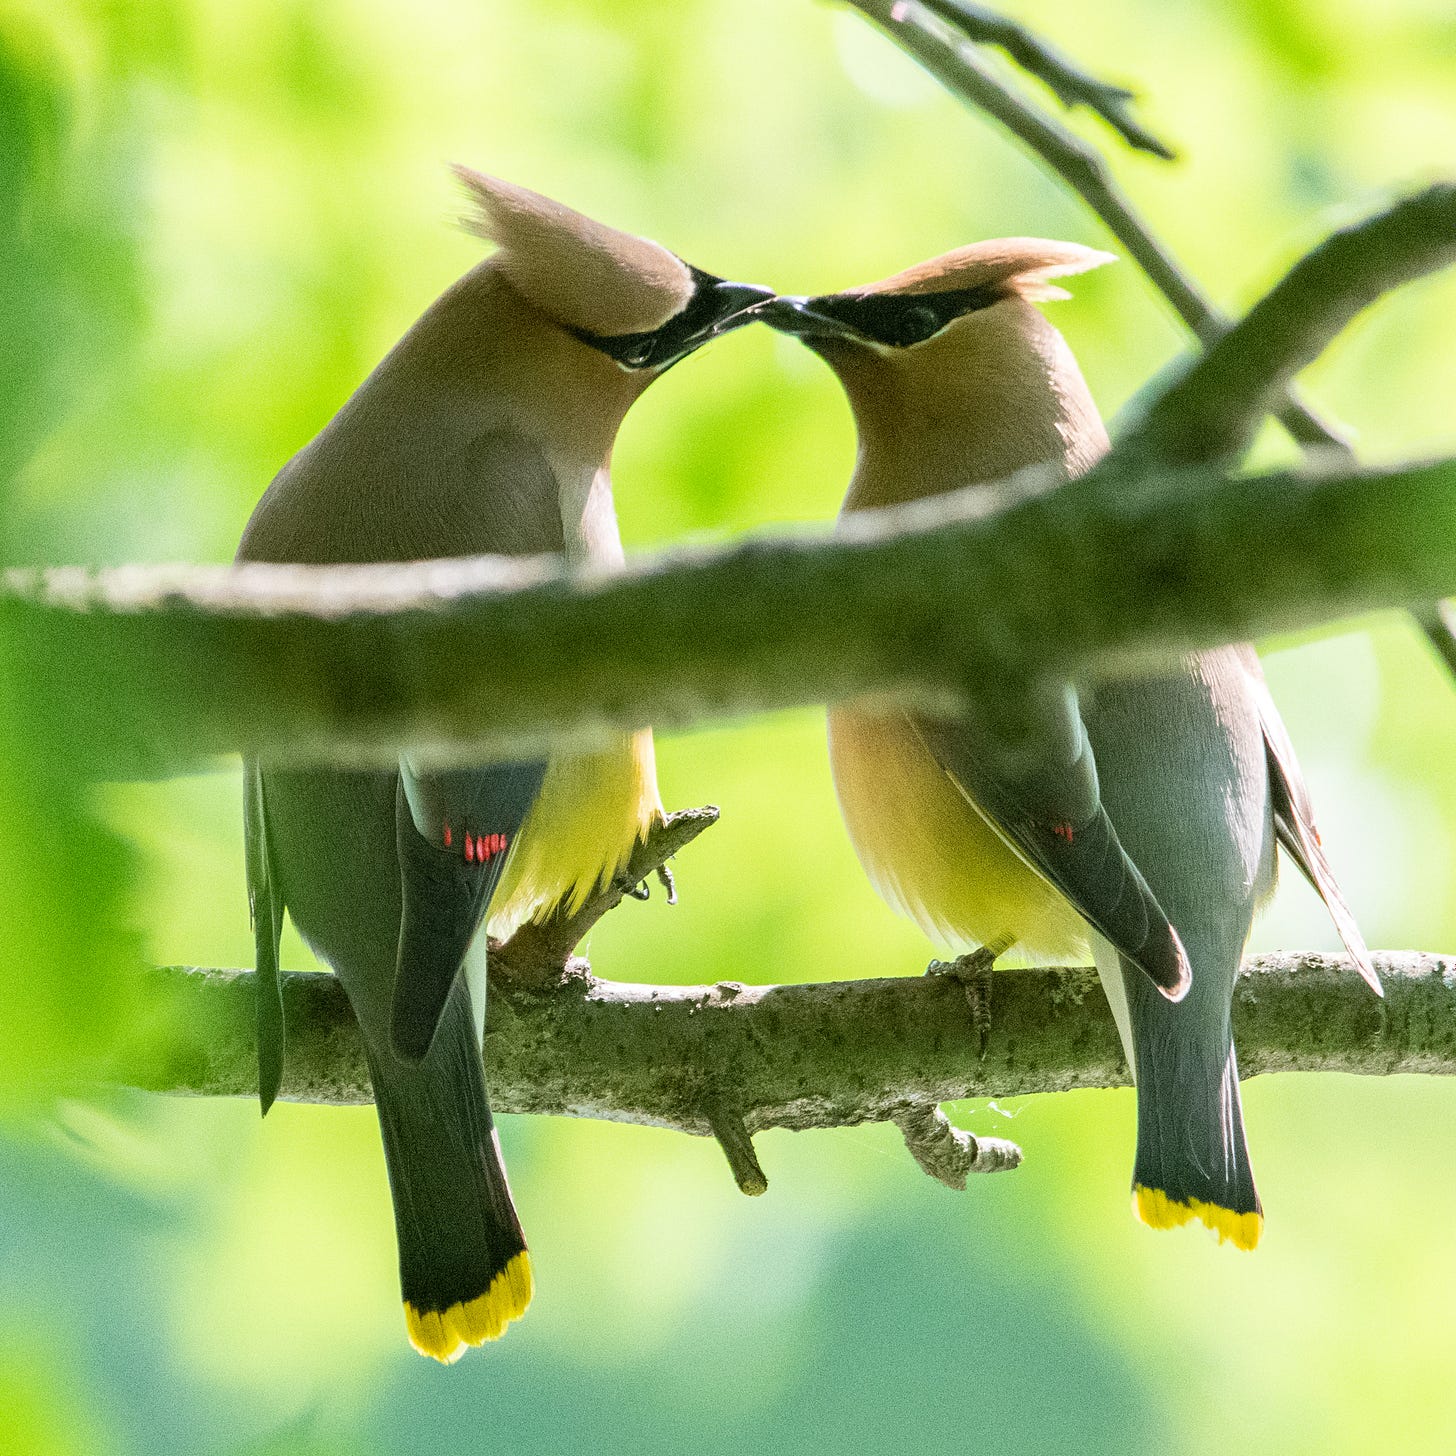 Two cedar waxwings perched next to each other, kissing, partially obstructed by a branch in the foreground